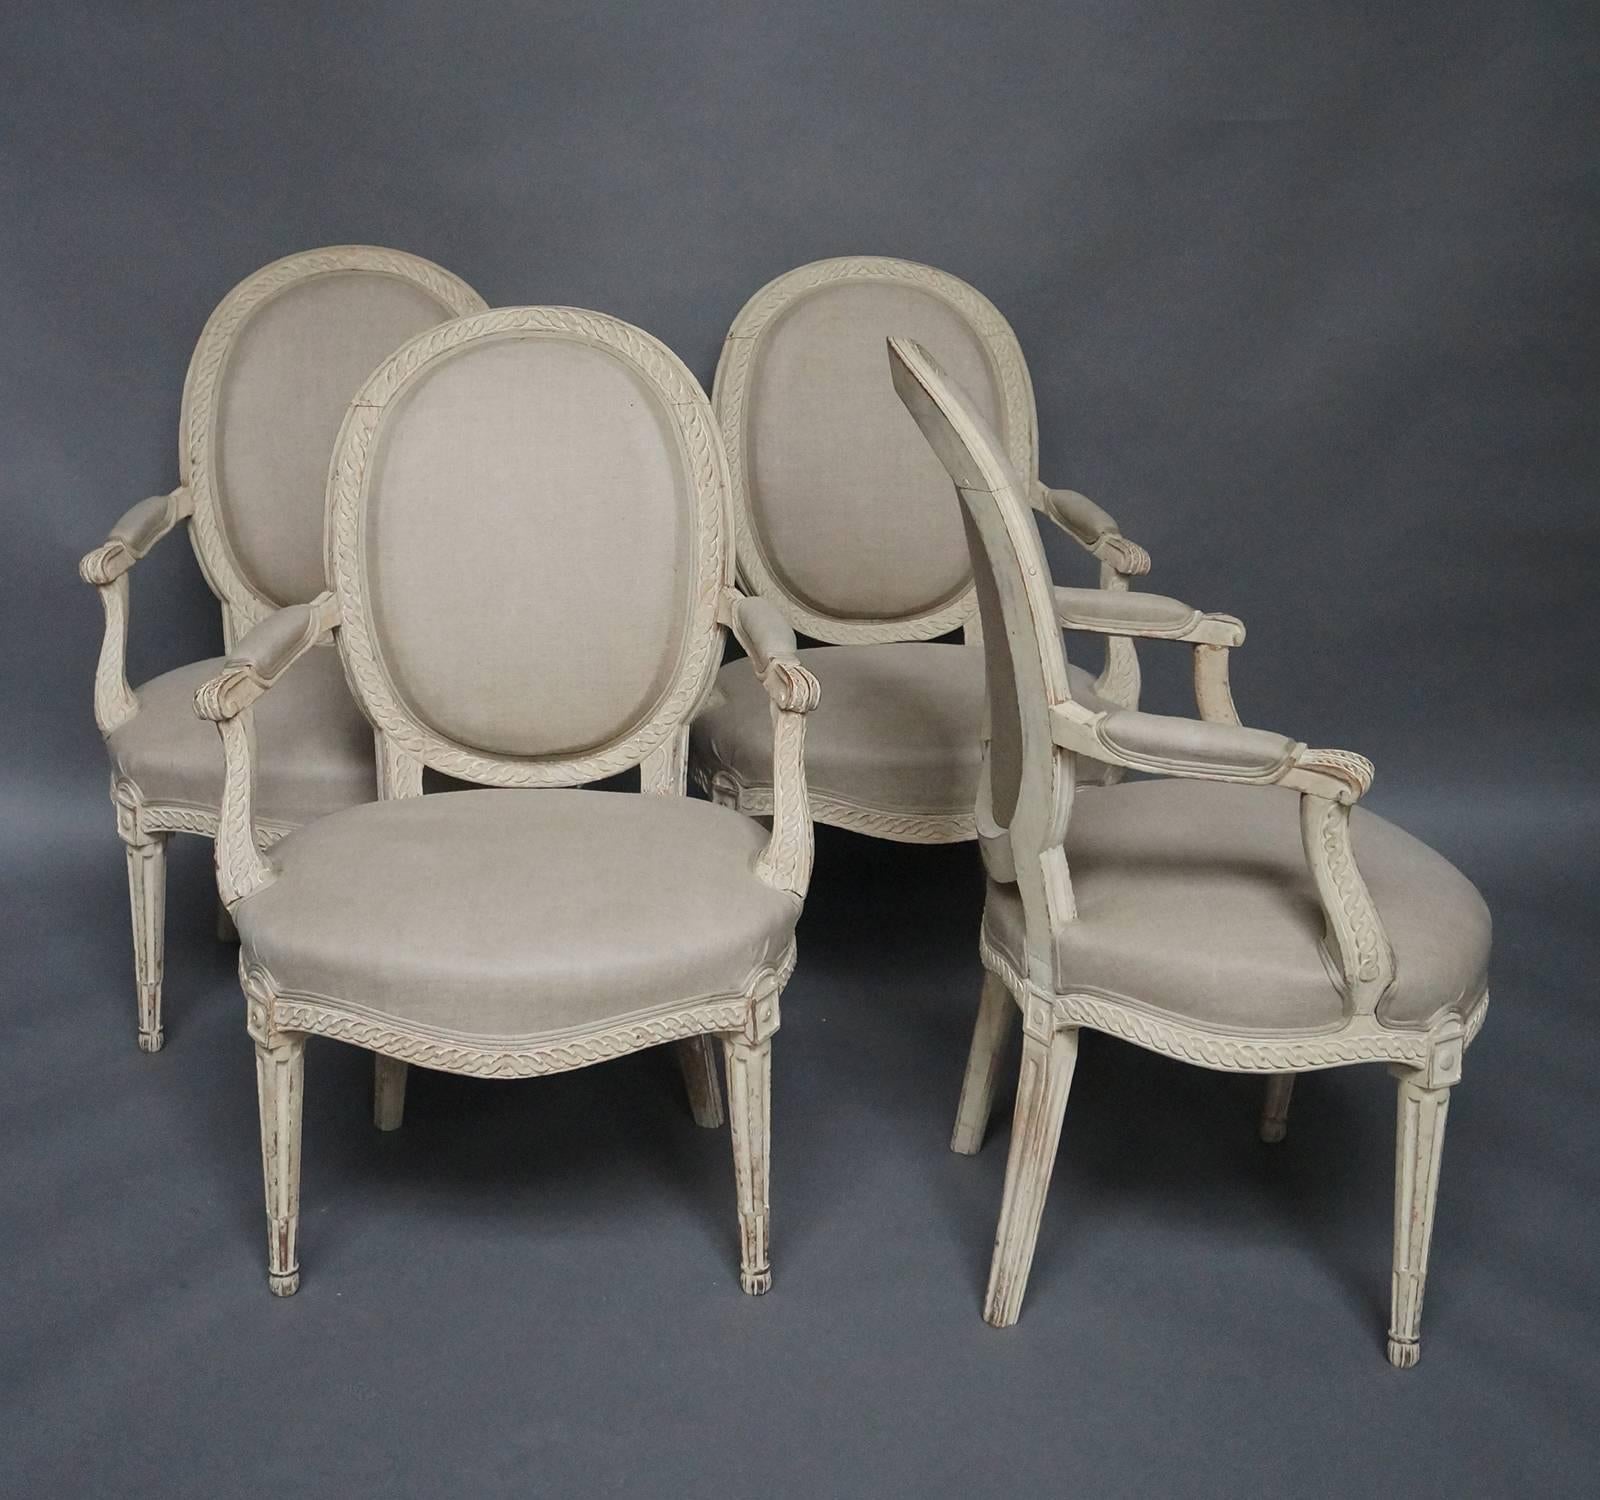 Set of four antique Swedish chairs in the Gustavian style, circa 1870, with guilloche carving surrounding the backs and repeating on the armrest supports and the apron. Upholstered seats, backs, and armrests. Tapering, square legs.